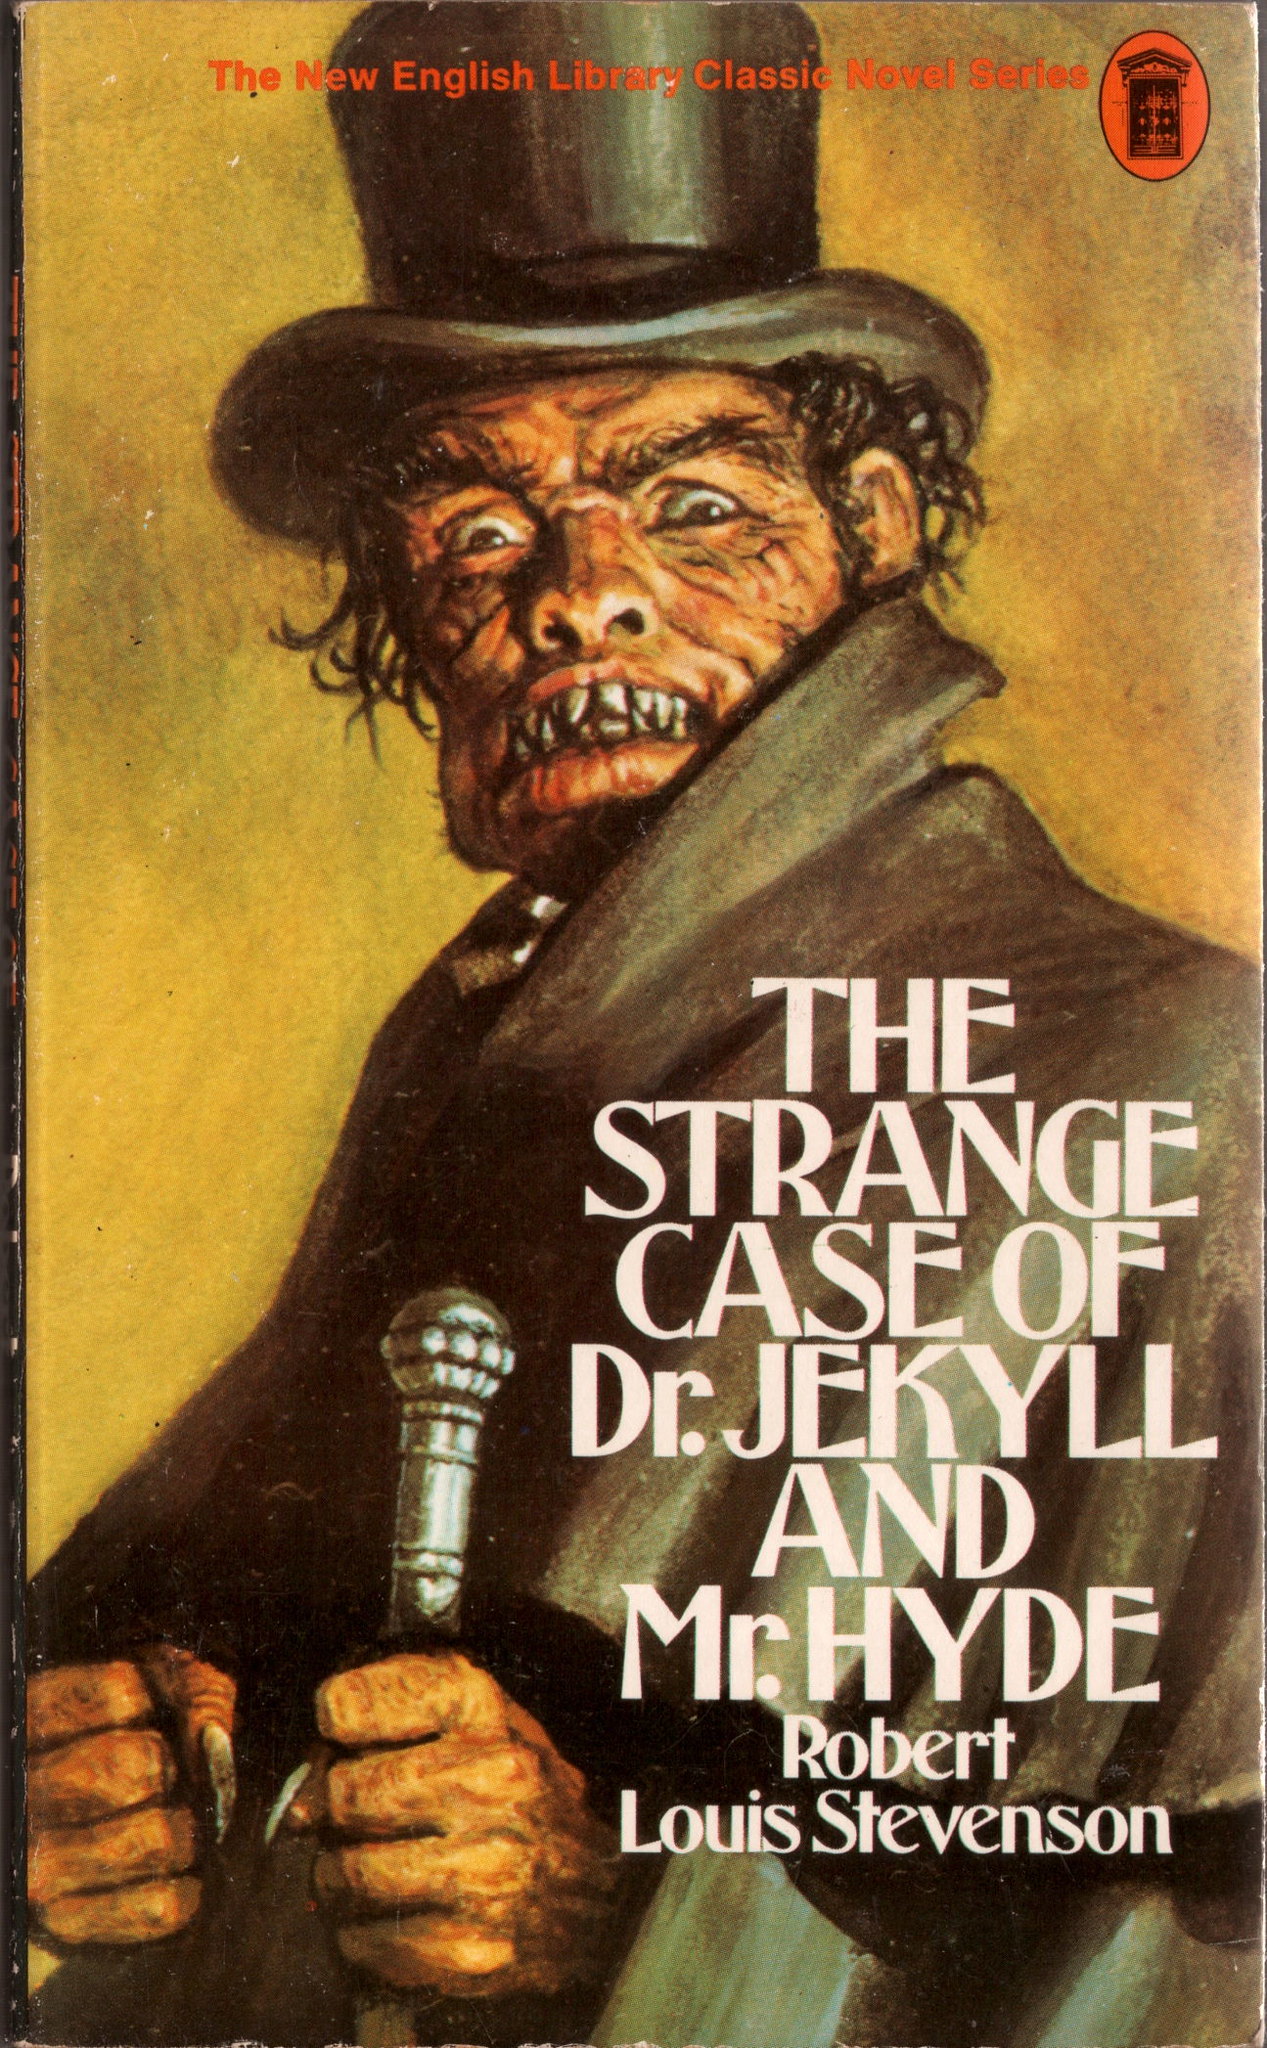 Cover of The Strange Case of Dr Jekyll and Mr Hide - a bestial man wears a top hat